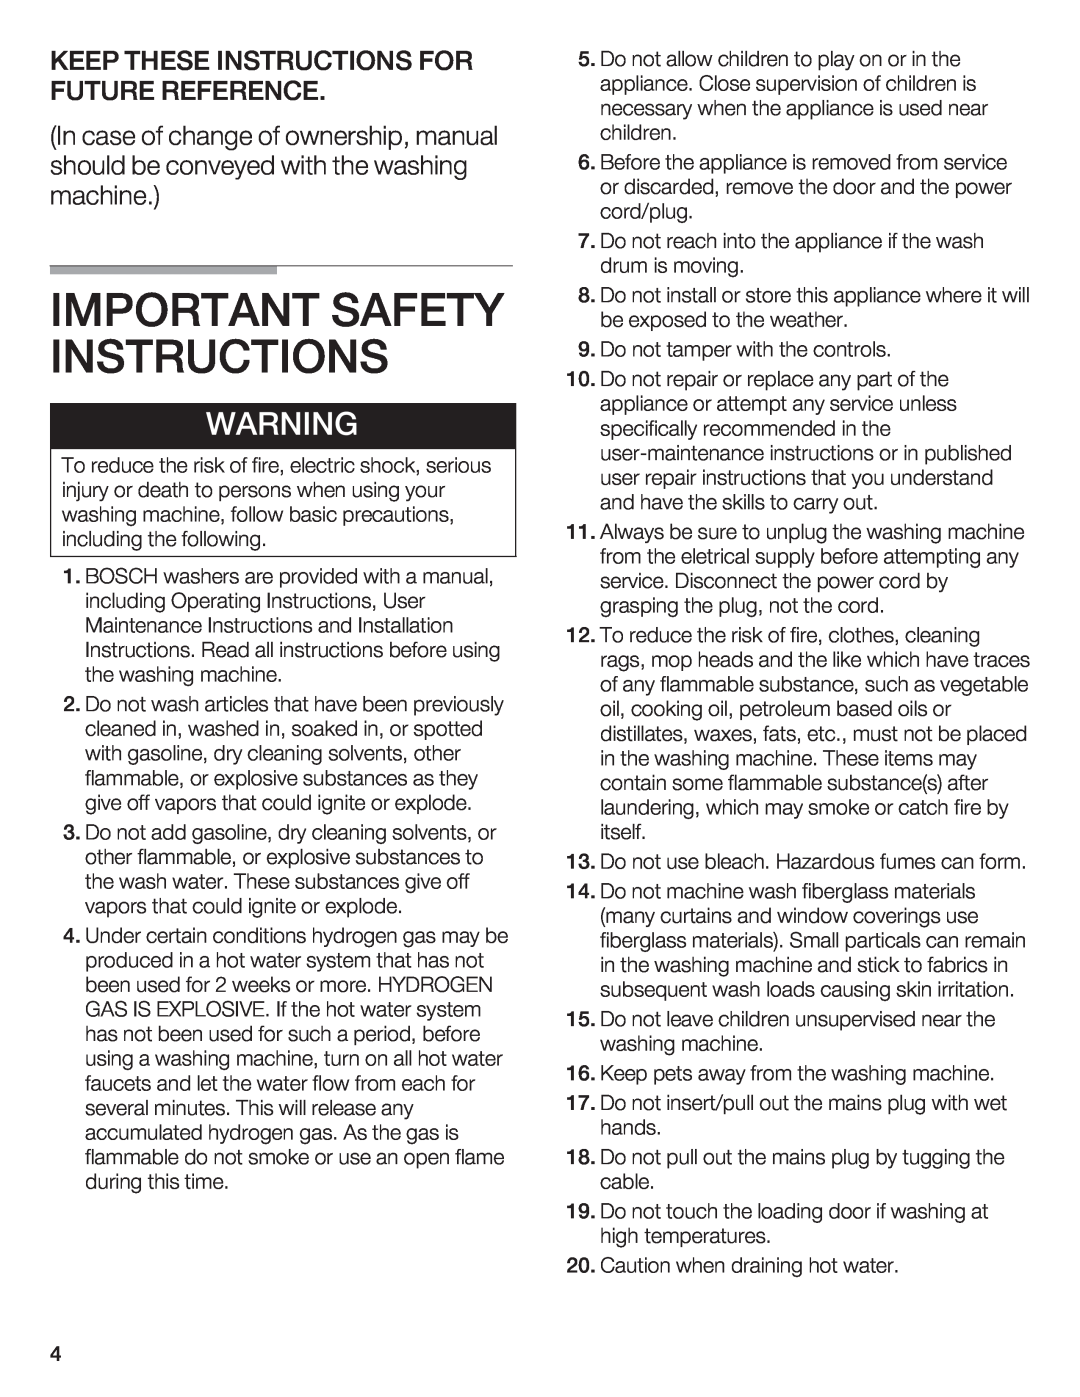 Bosch Appliances WFL 2060, WFL 2050 manual Instructions, Safety 